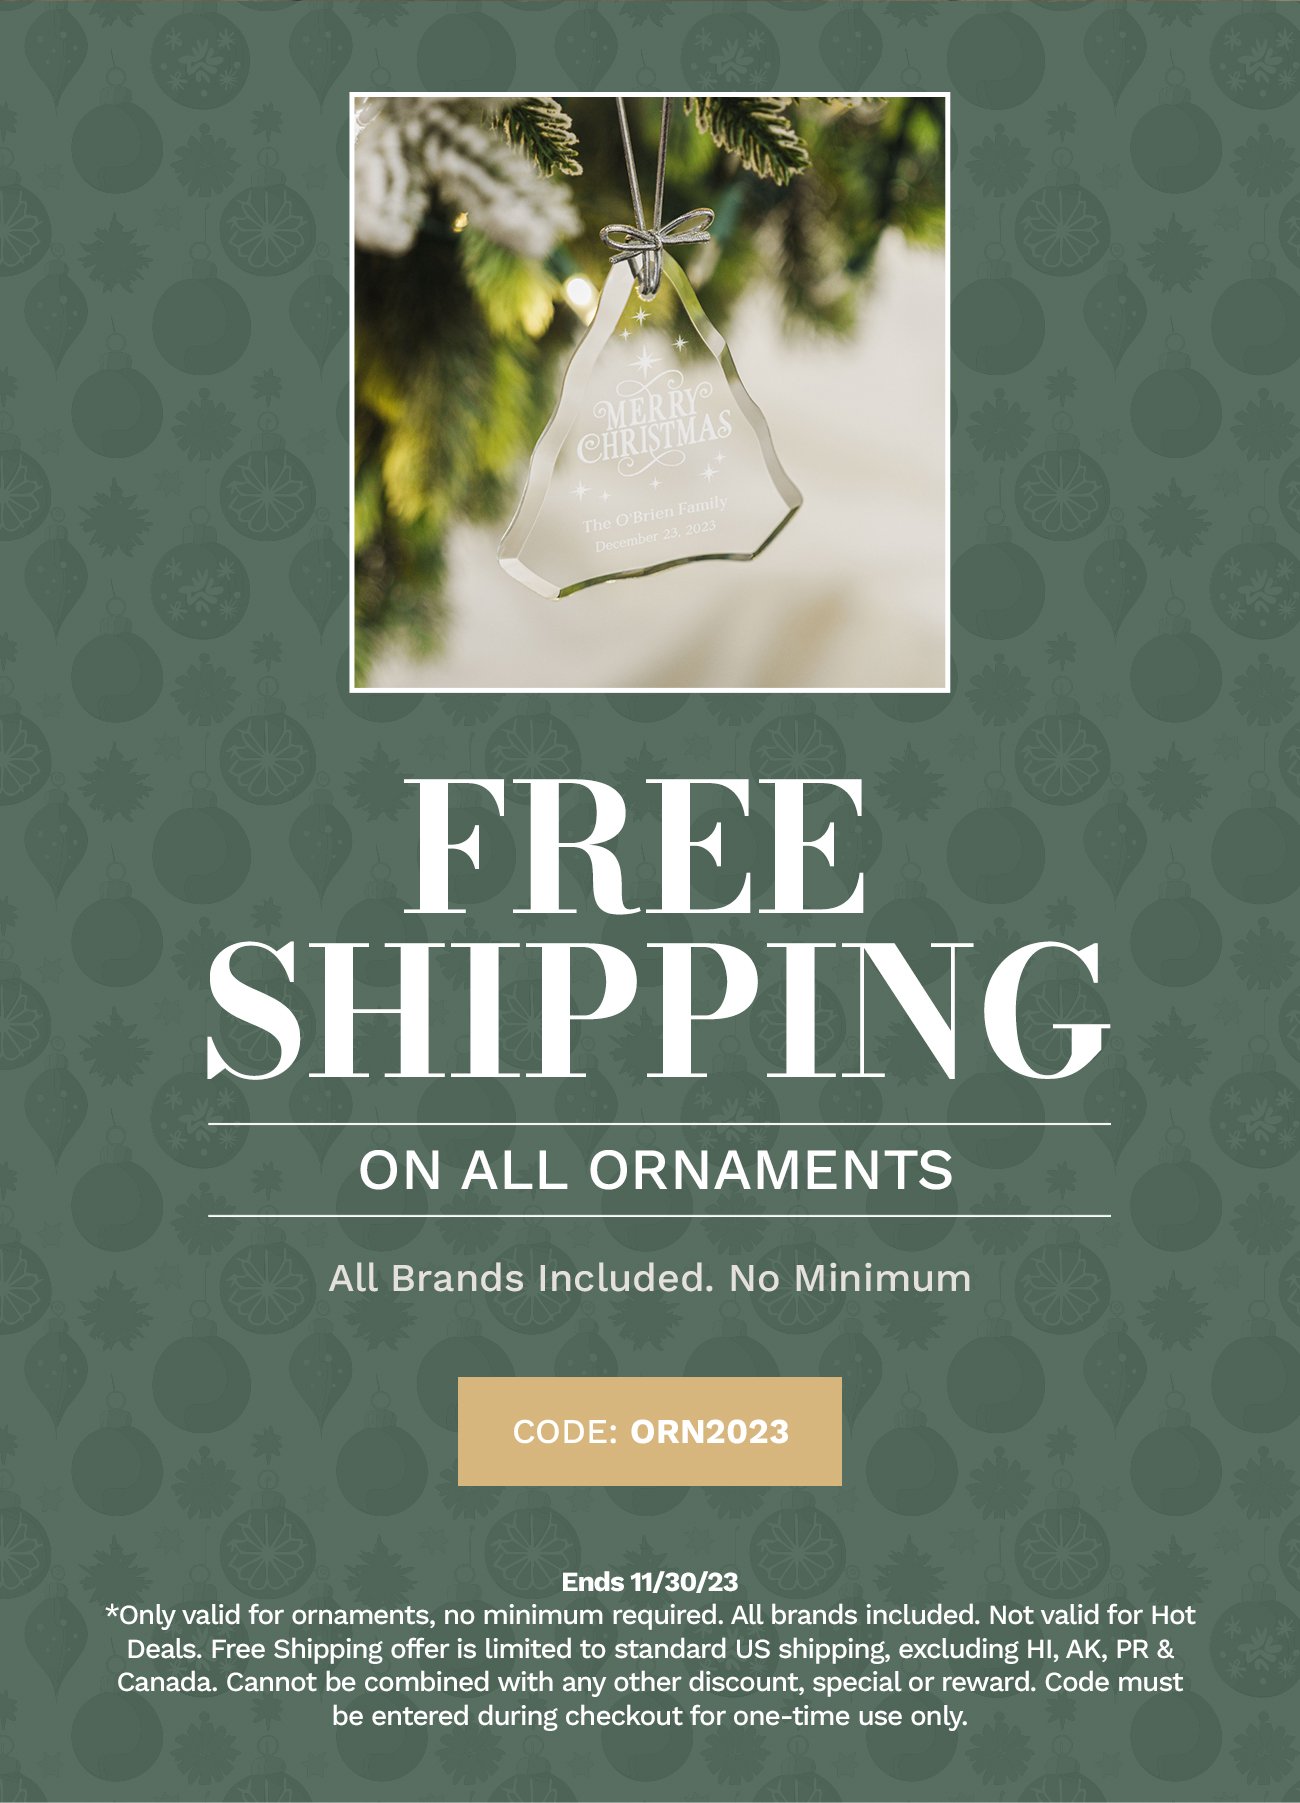 FREE SHIPPING ON ALL ORNAMENTS. All Brands Included. No Minimum. CODE: ORN2023.